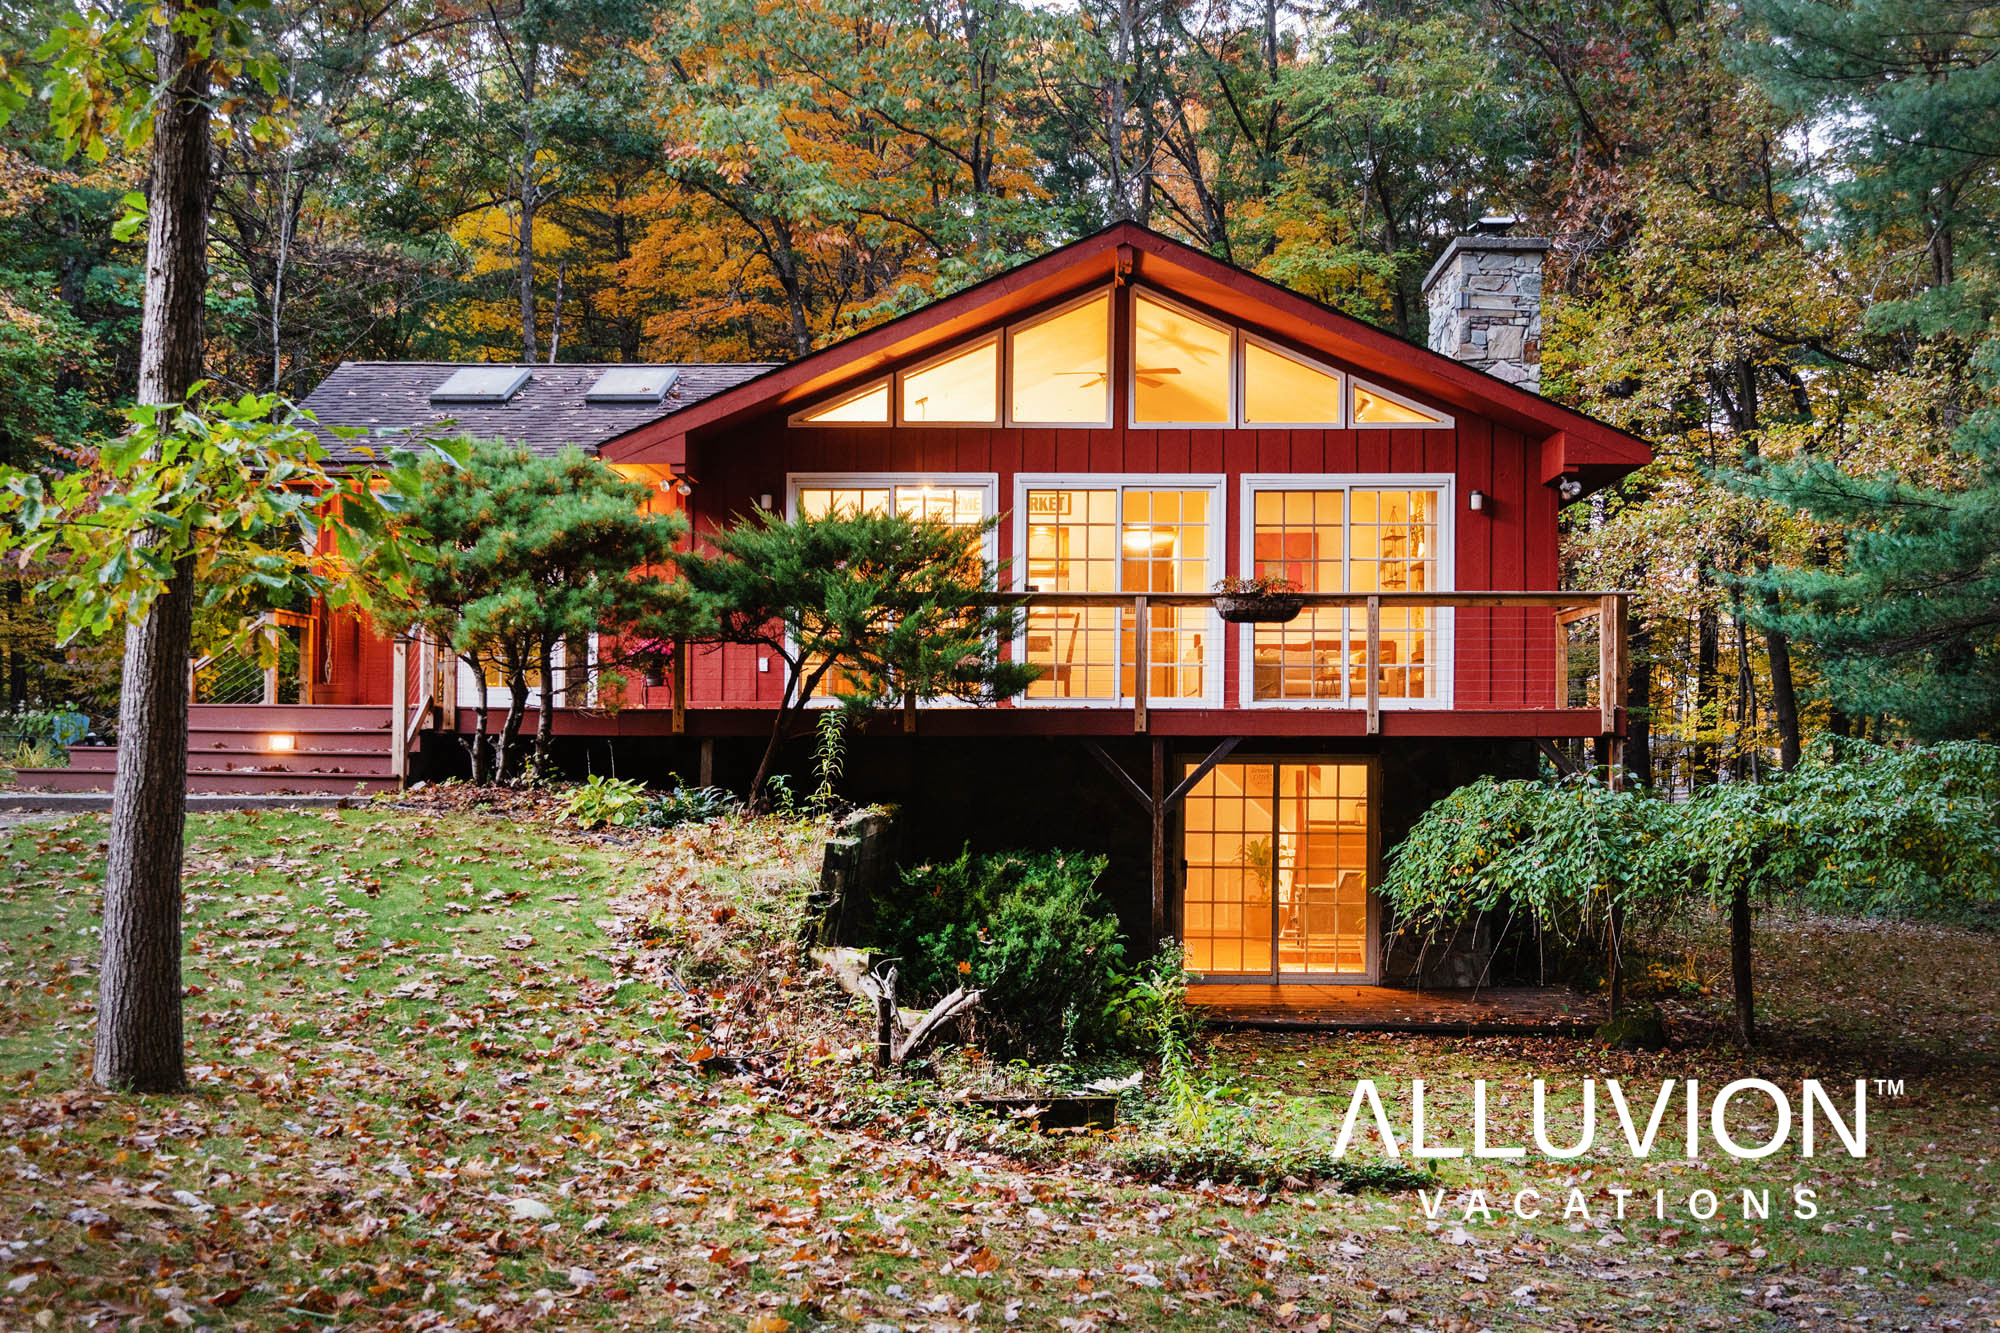 Find serenity at Alluvion Vacations’ Private Getaway Airbnb Cabin near Hudson, NY